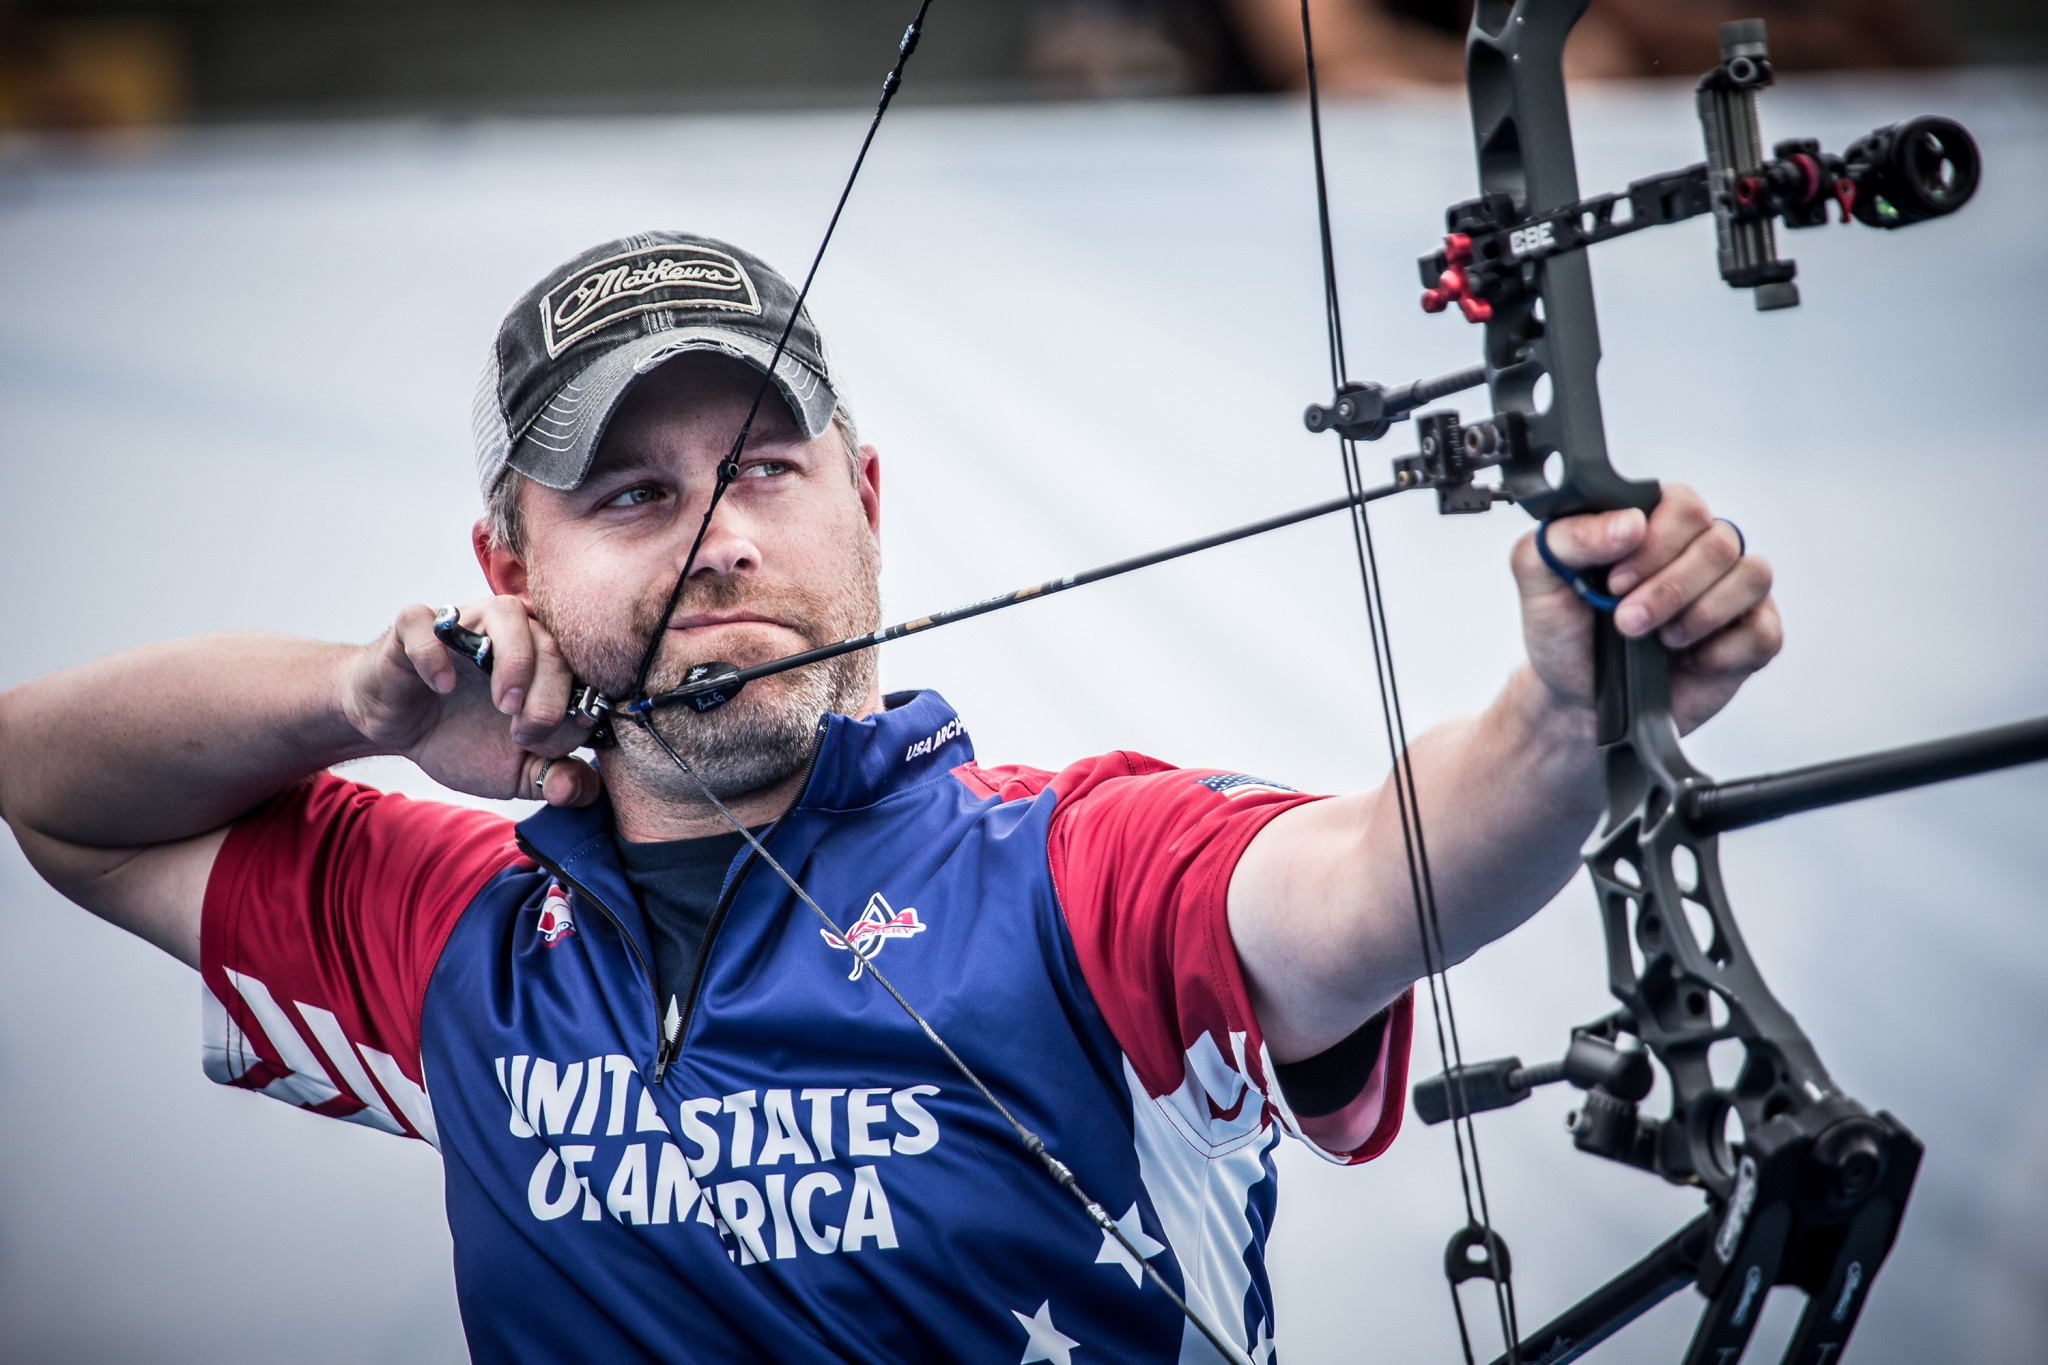 Gellenthien goes for compound gold again at Archery World Cup in Shanghai